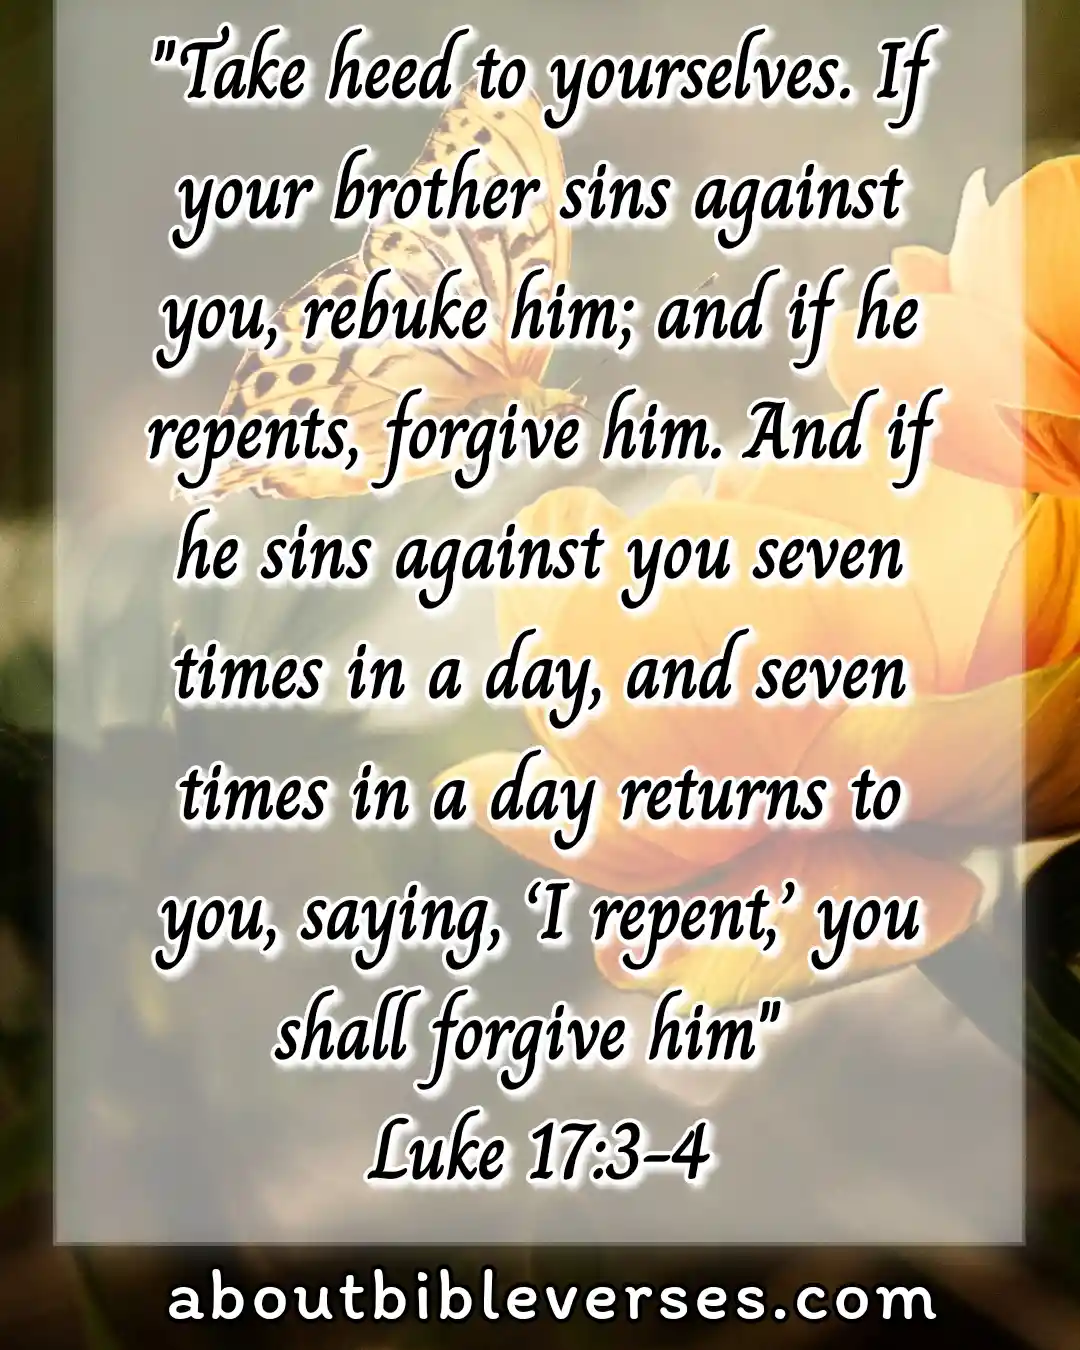 Bible Verses About Forgiving Others Who Hurt You (Luke 17:3-4)